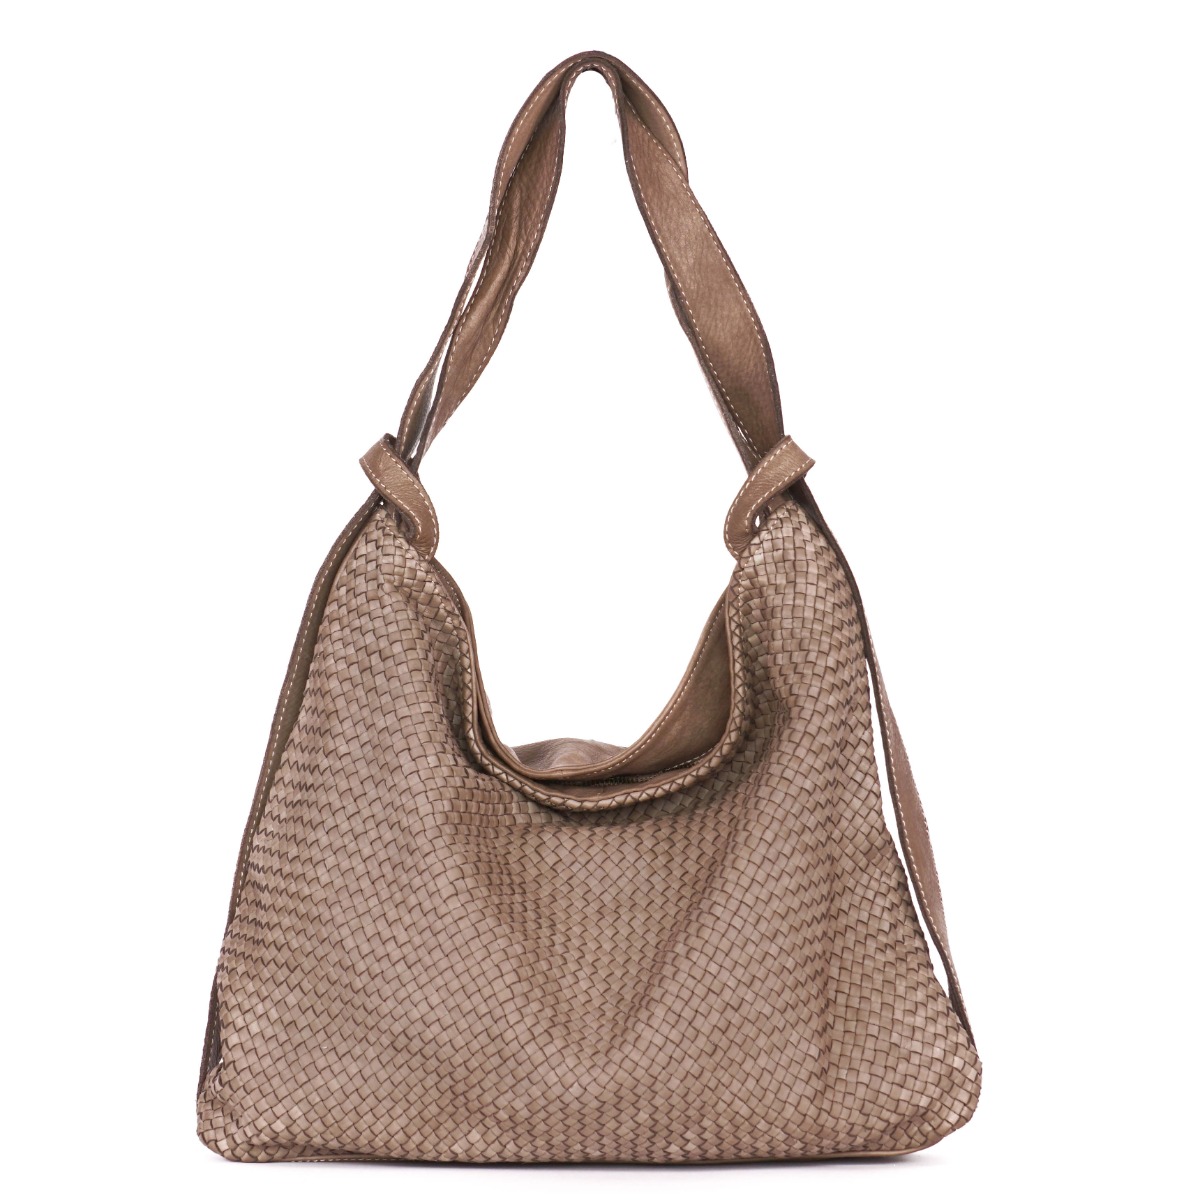 Taupe vintage woven leather convertible hobo bag